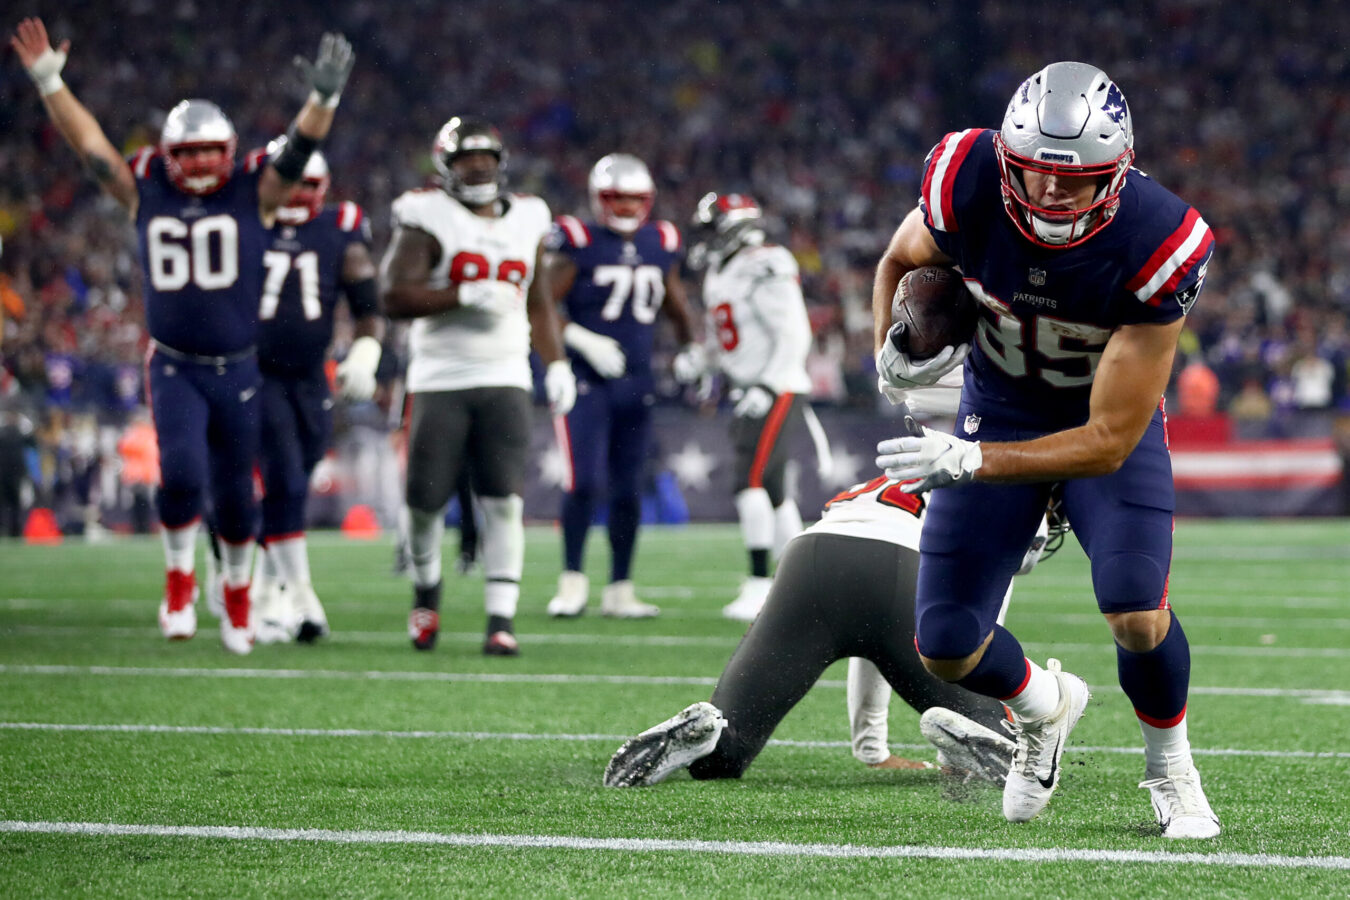 FOXBOROUGH, MASSACHUSETTS - OCTOBER 03: Hunter Henry #85 of the New England Patriots scores a touchdown against the Tampa Bay Buccaneers during the second quarter in the game at Gillette Stadium on October 03, 2021 in Foxborough, Massachusetts. (Photo by Adam Glanzman/Getty Images)